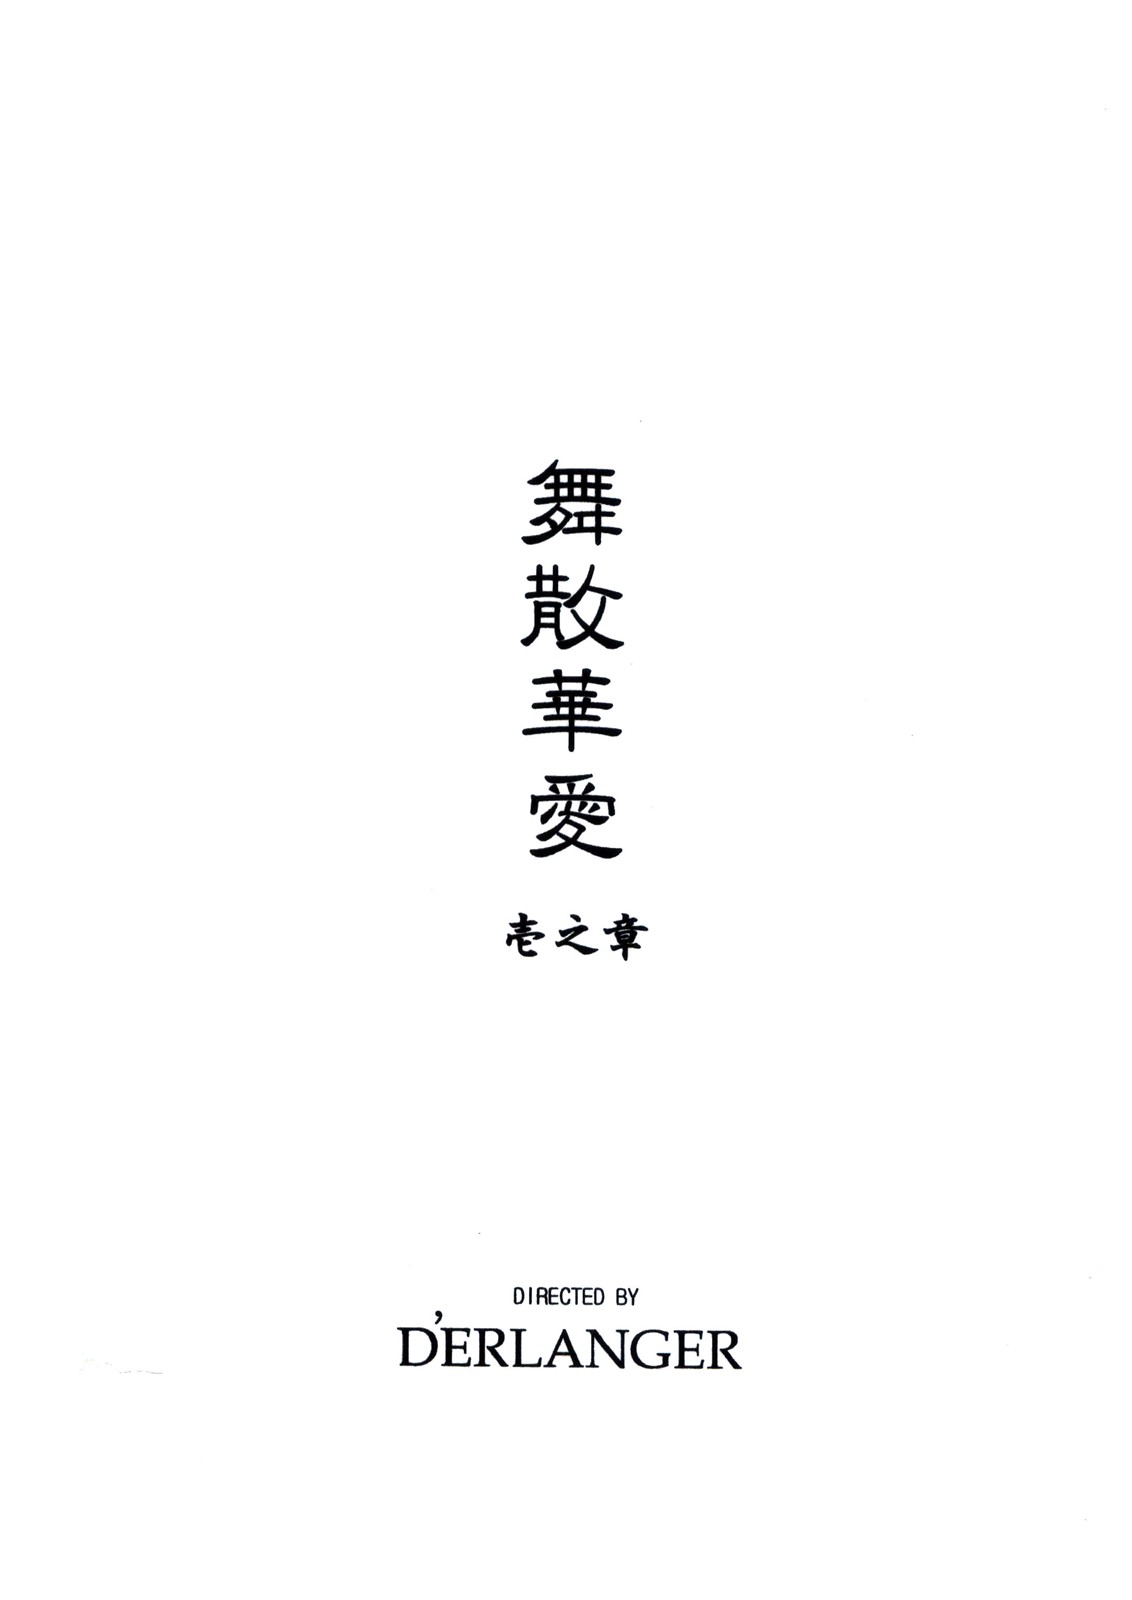 [D'ERLANGER (Yamazaki Show)] Maisangeai Vol.1 (The King of Fighters) page 3 full